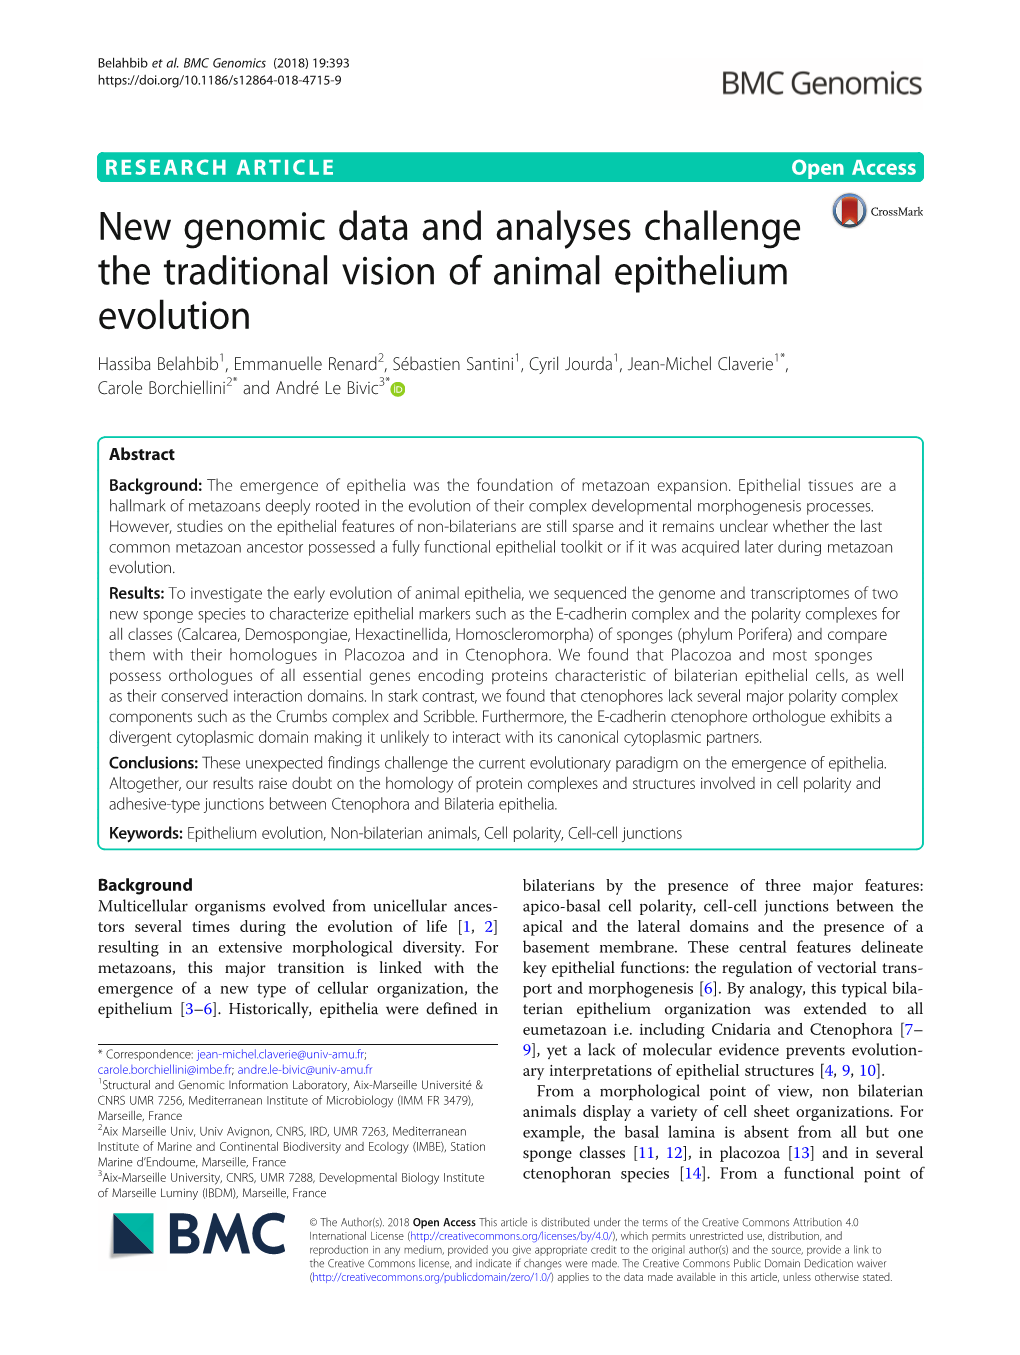 New Genomic Data and Analyses Challenge the Traditional